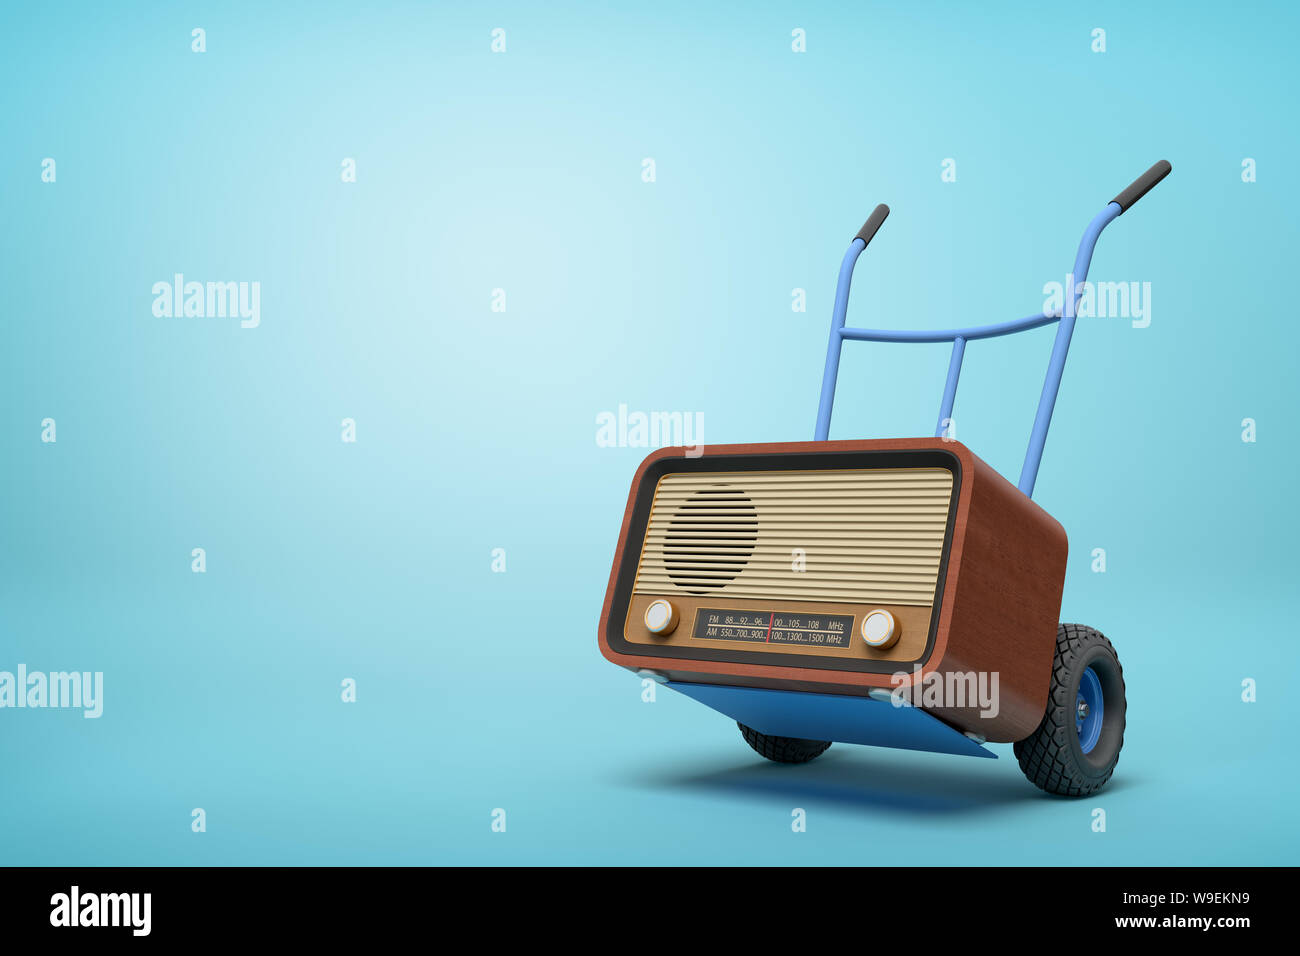 3d rendering of blue hand truck standing in half-turn with brown retro radio set on it on light-blue background with copy space. Stock Photo